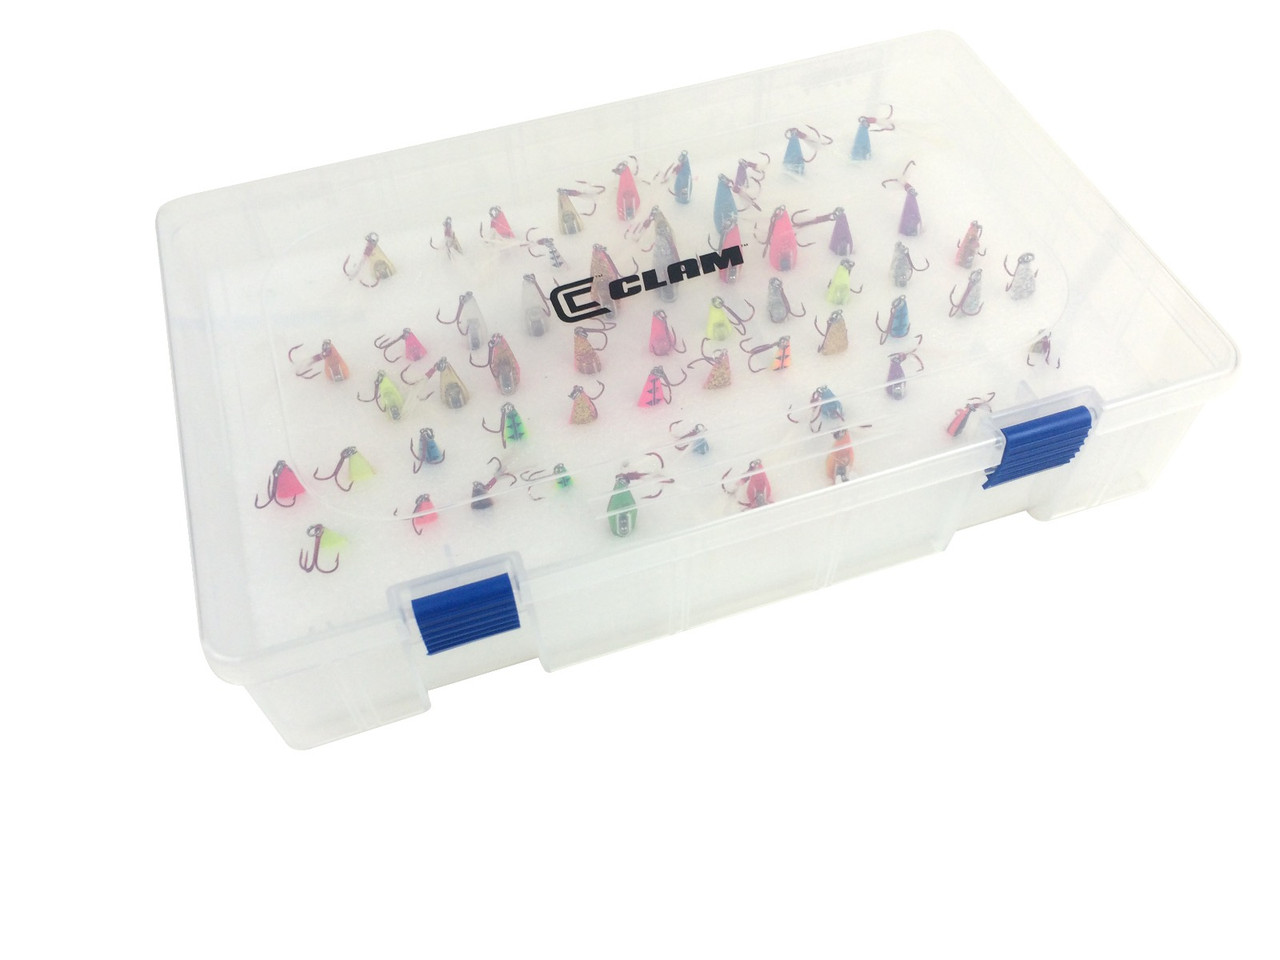 Clam Fishing Large Deluxe 85 Slot Spoon Box Clear Plastic - 110160